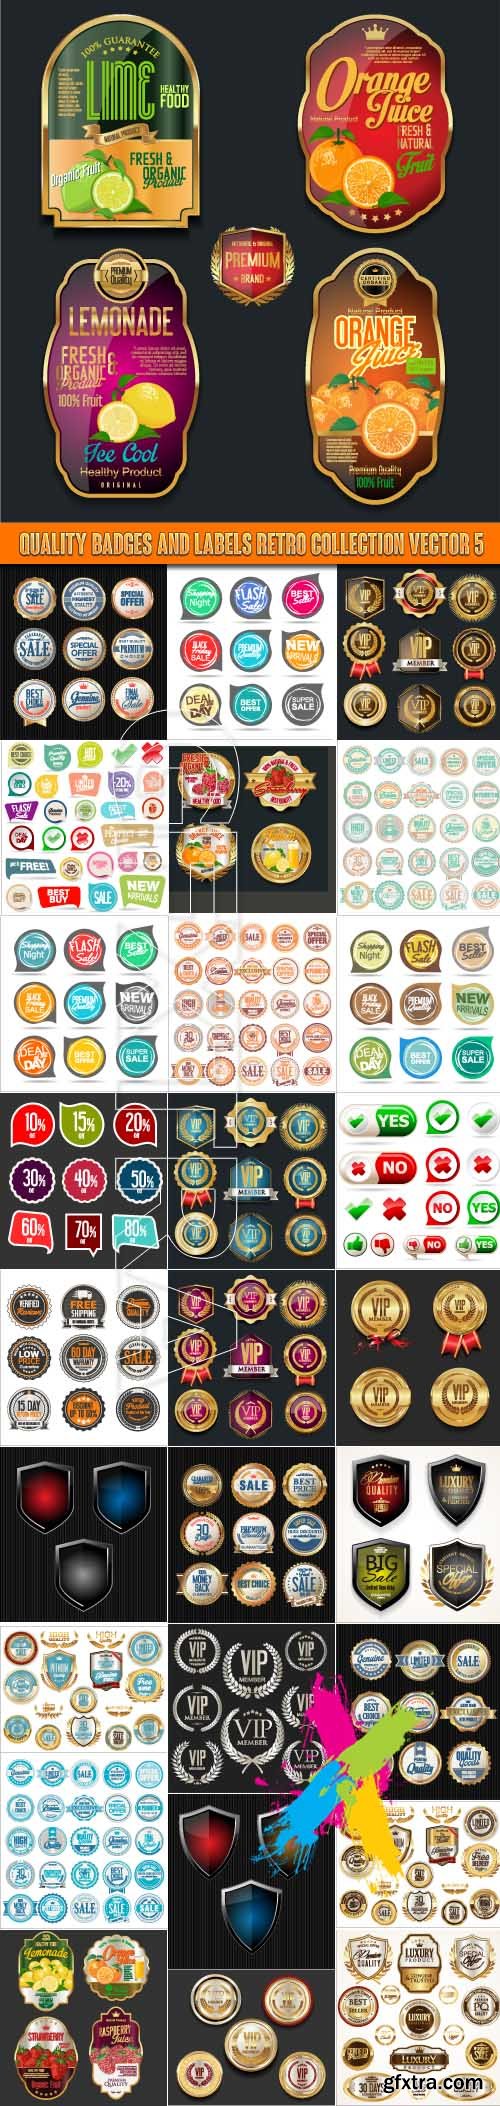 Quality badges and labels retro collection vector 5